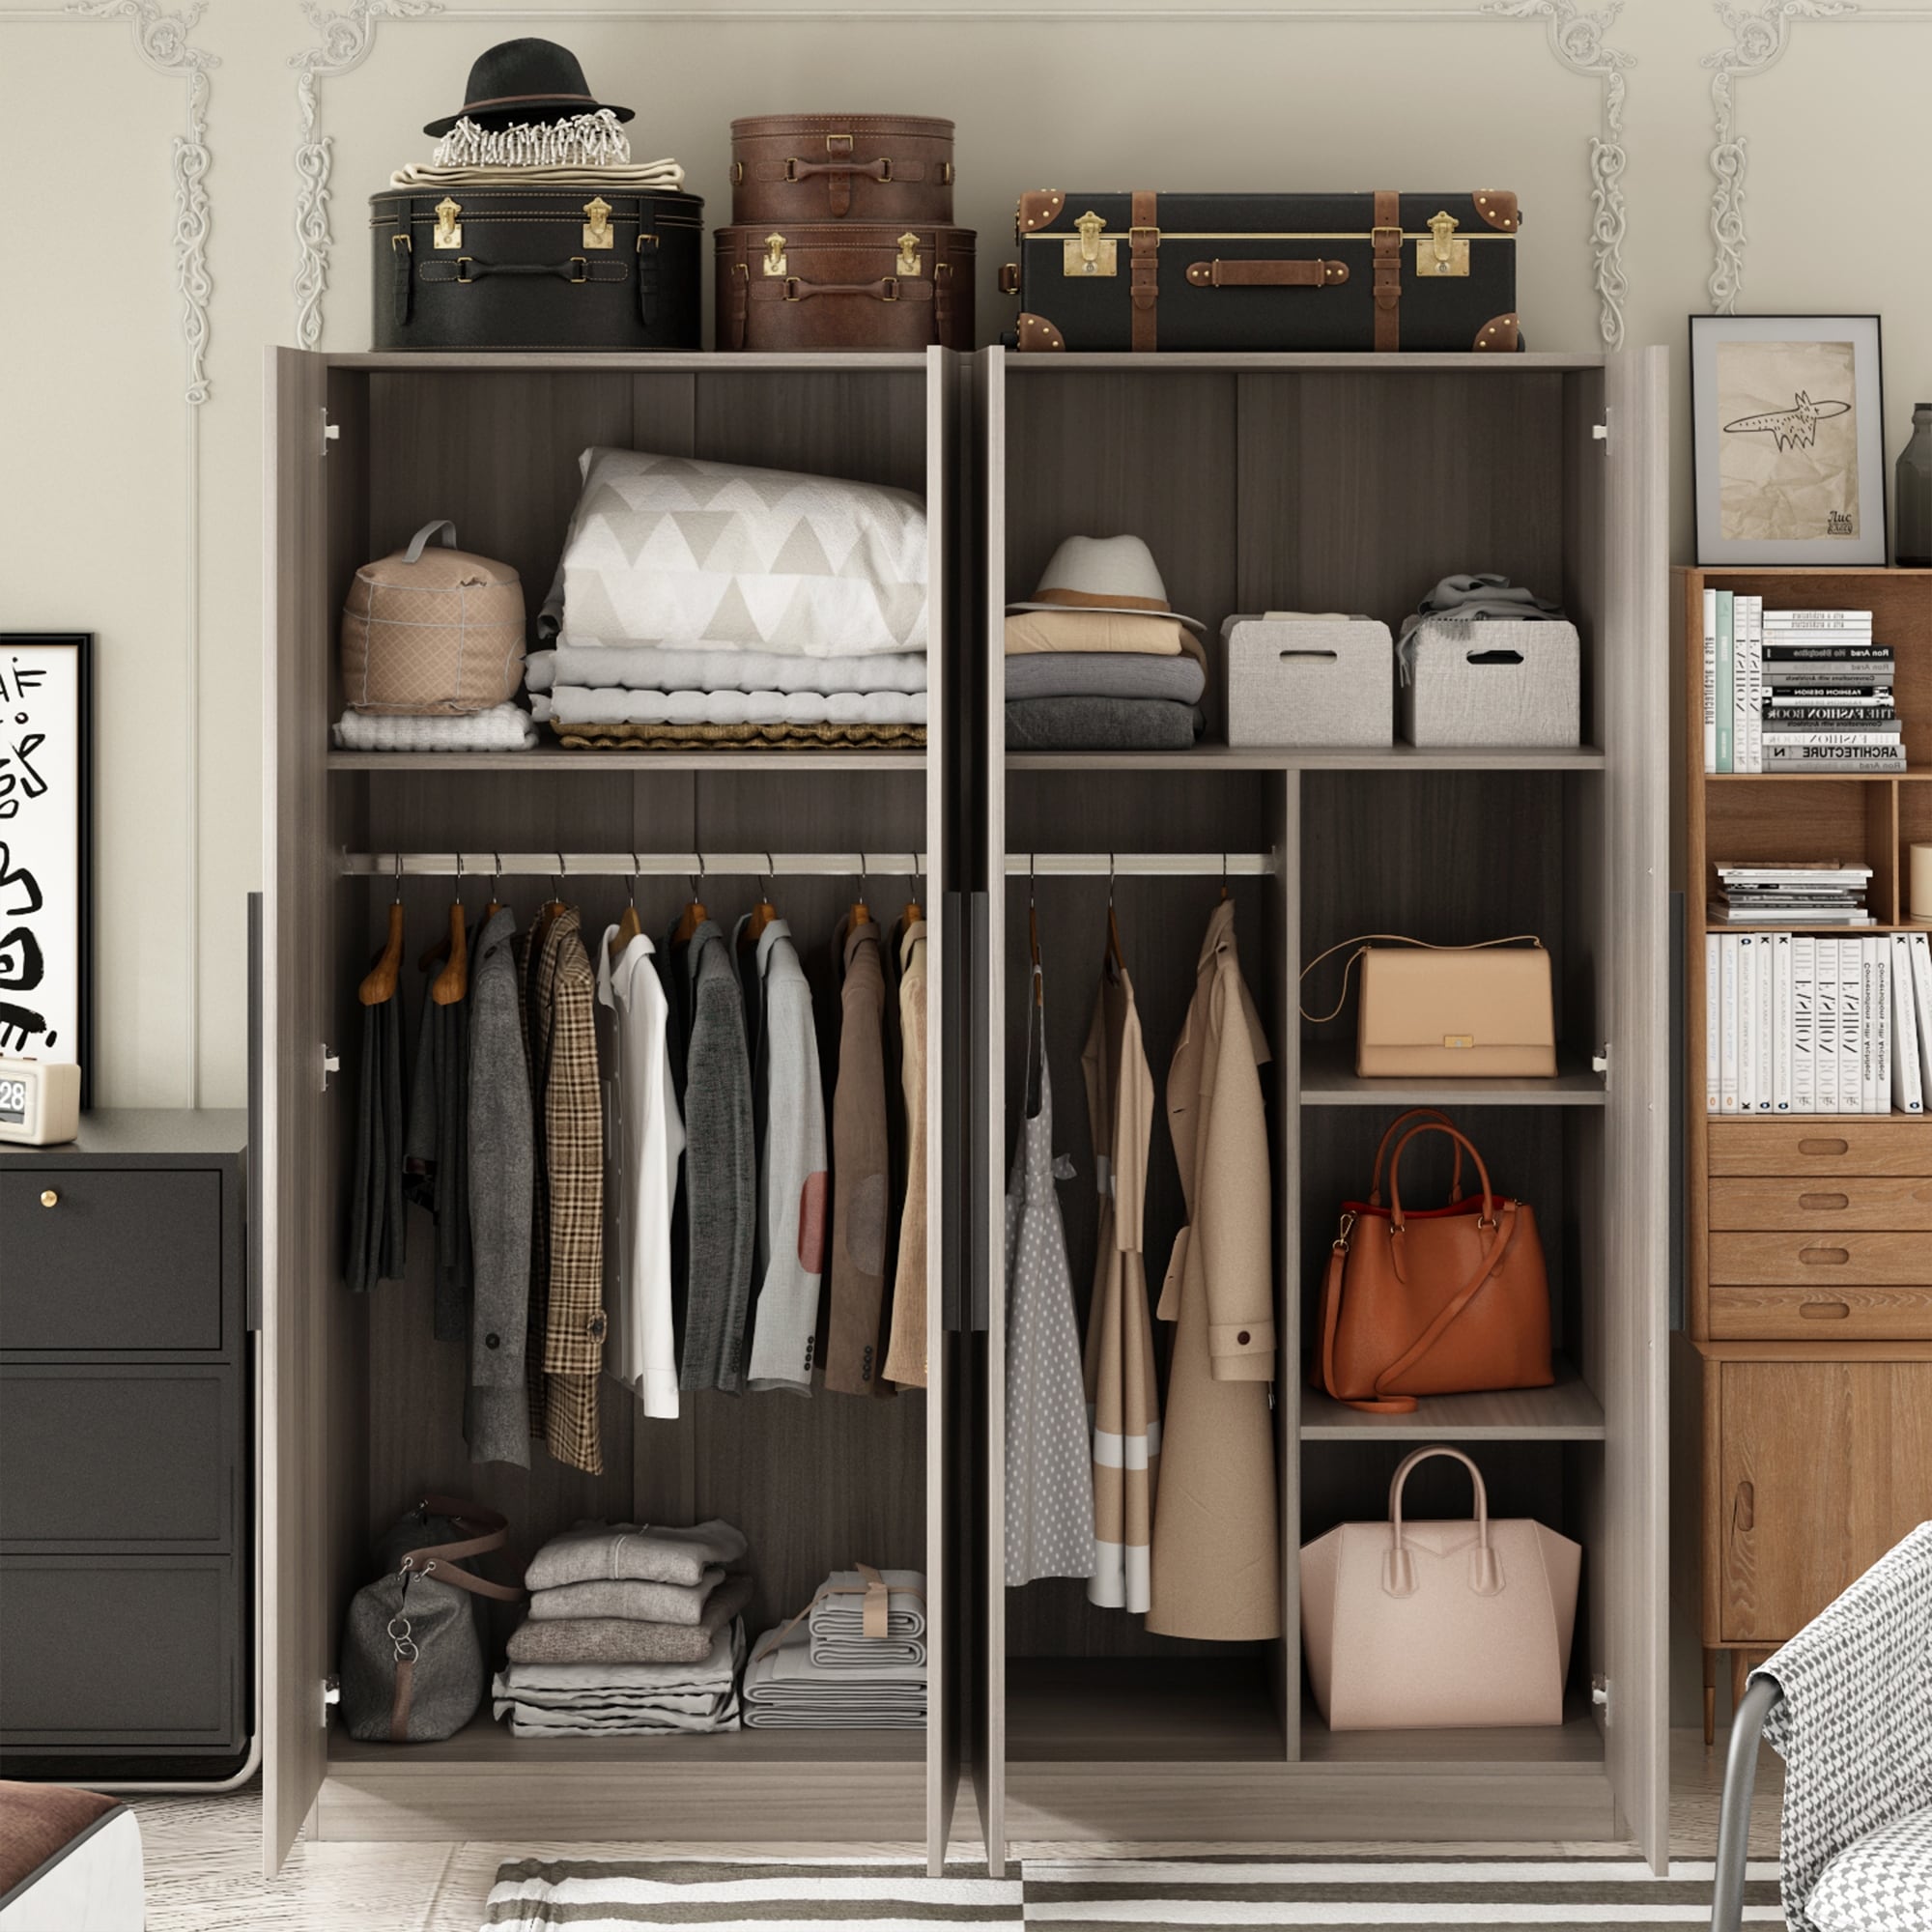 https://ak1.ostkcdn.com/images/products/is/images/direct/4f4dcf4cce19107236b9b031673b8a0e55a42d68/FAMAPY-Large-Armoire-Wardrobe-Closet-Cabinet-4-Doors.jpg